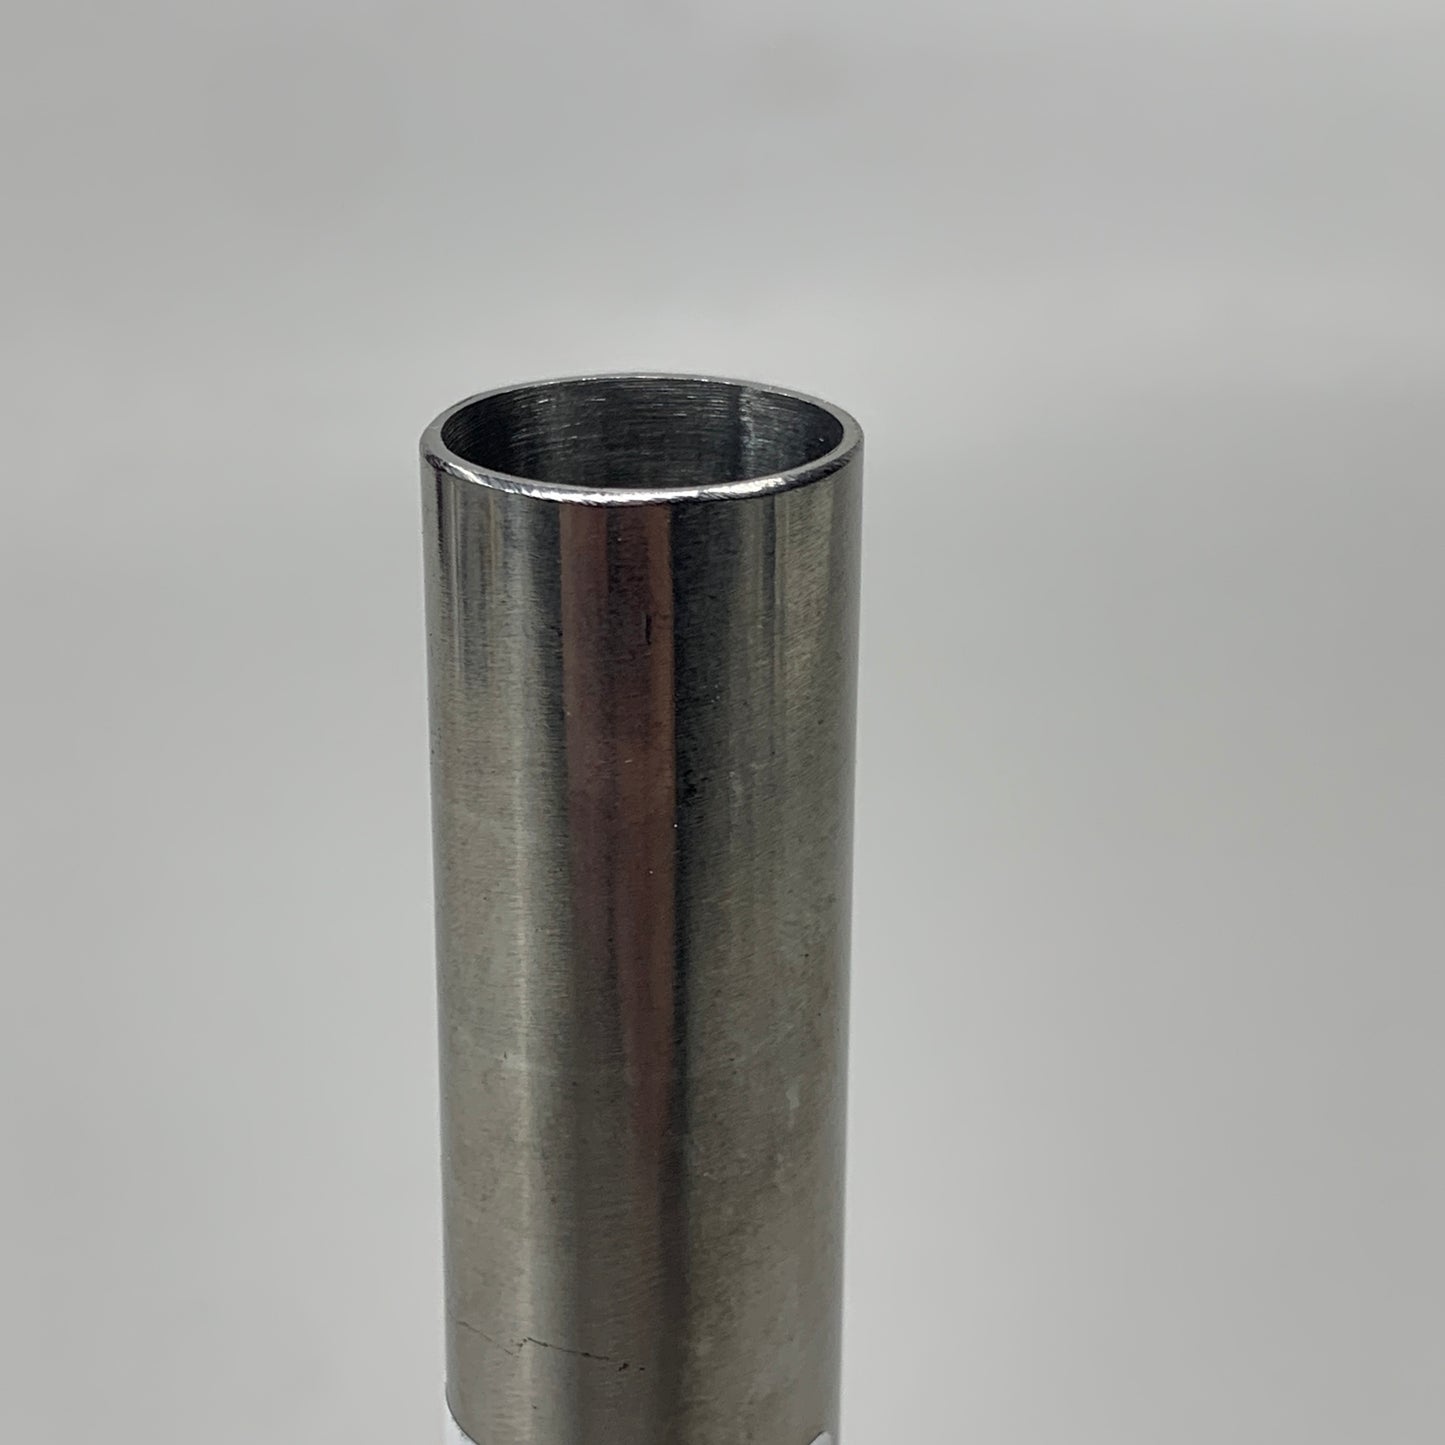 LEM Stuffing Tube 3/4" O.D Size for #32 Grinder Stainless Steel 057BSS